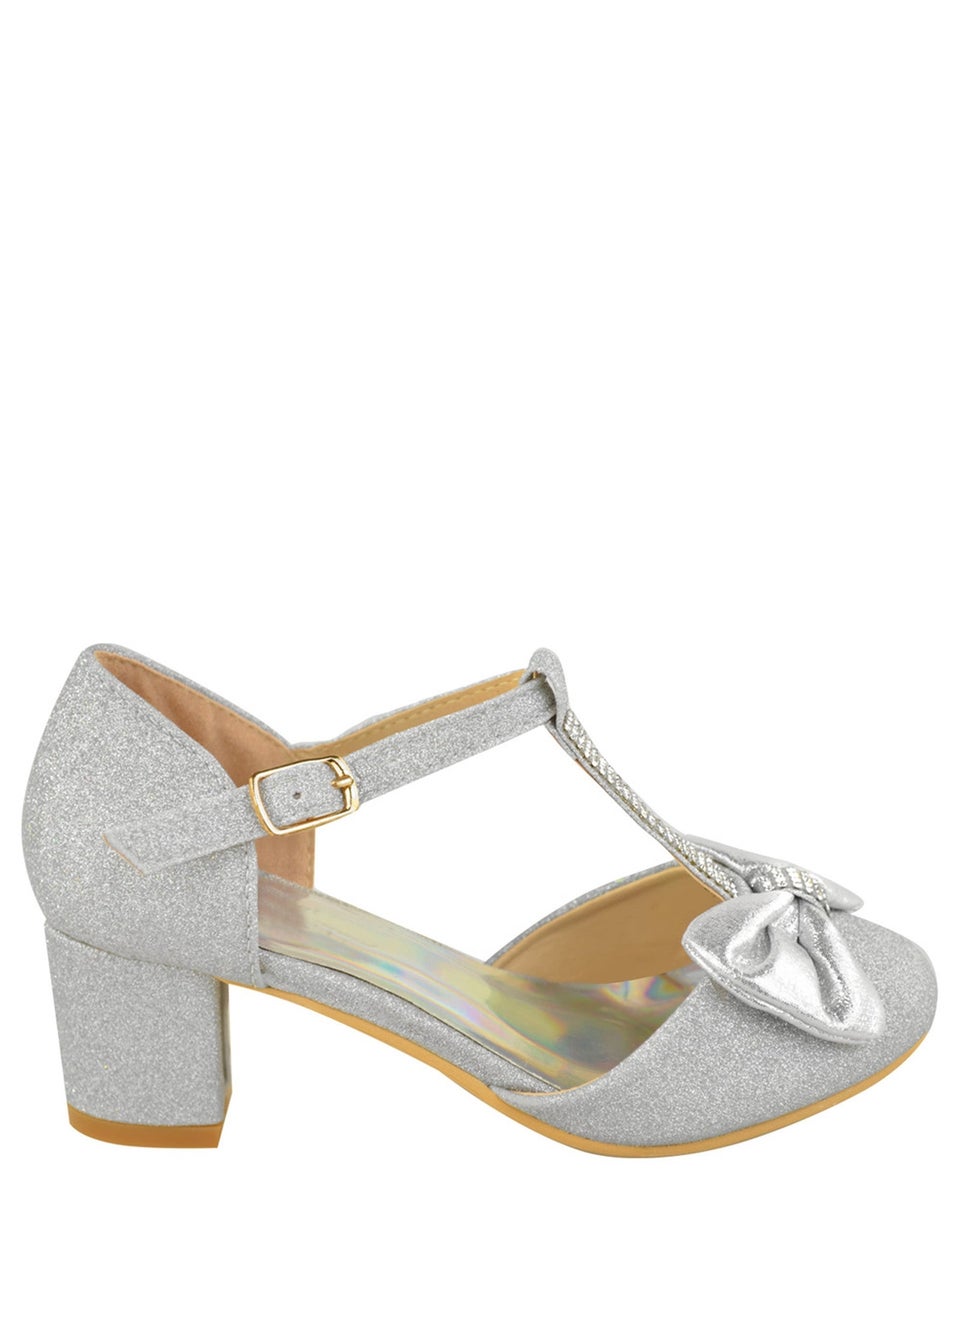 Where's That From Silver Glitter Chava Kids Mid Heel Sandals